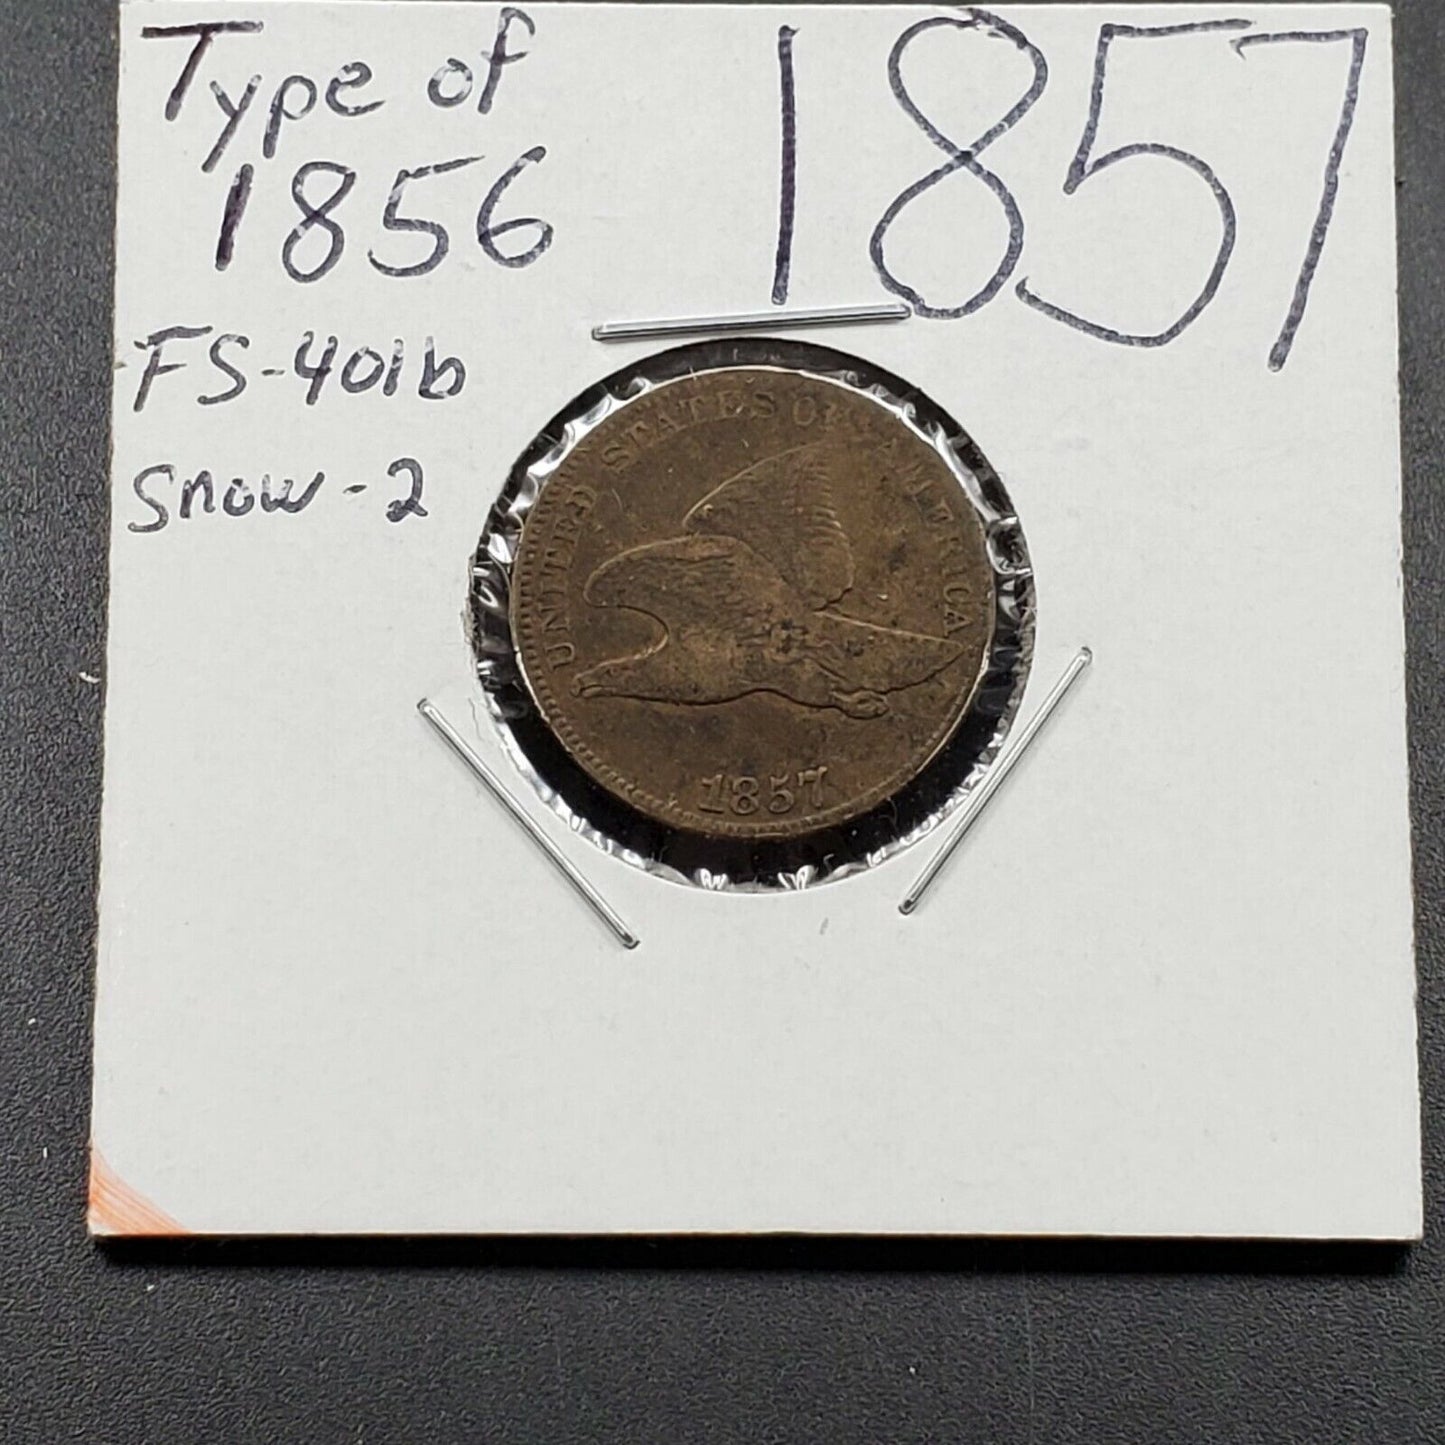 1857 of 1856 flying Eagle cent S-2 Snow 2 Type Of 1856 Obverse FS-401B Variety